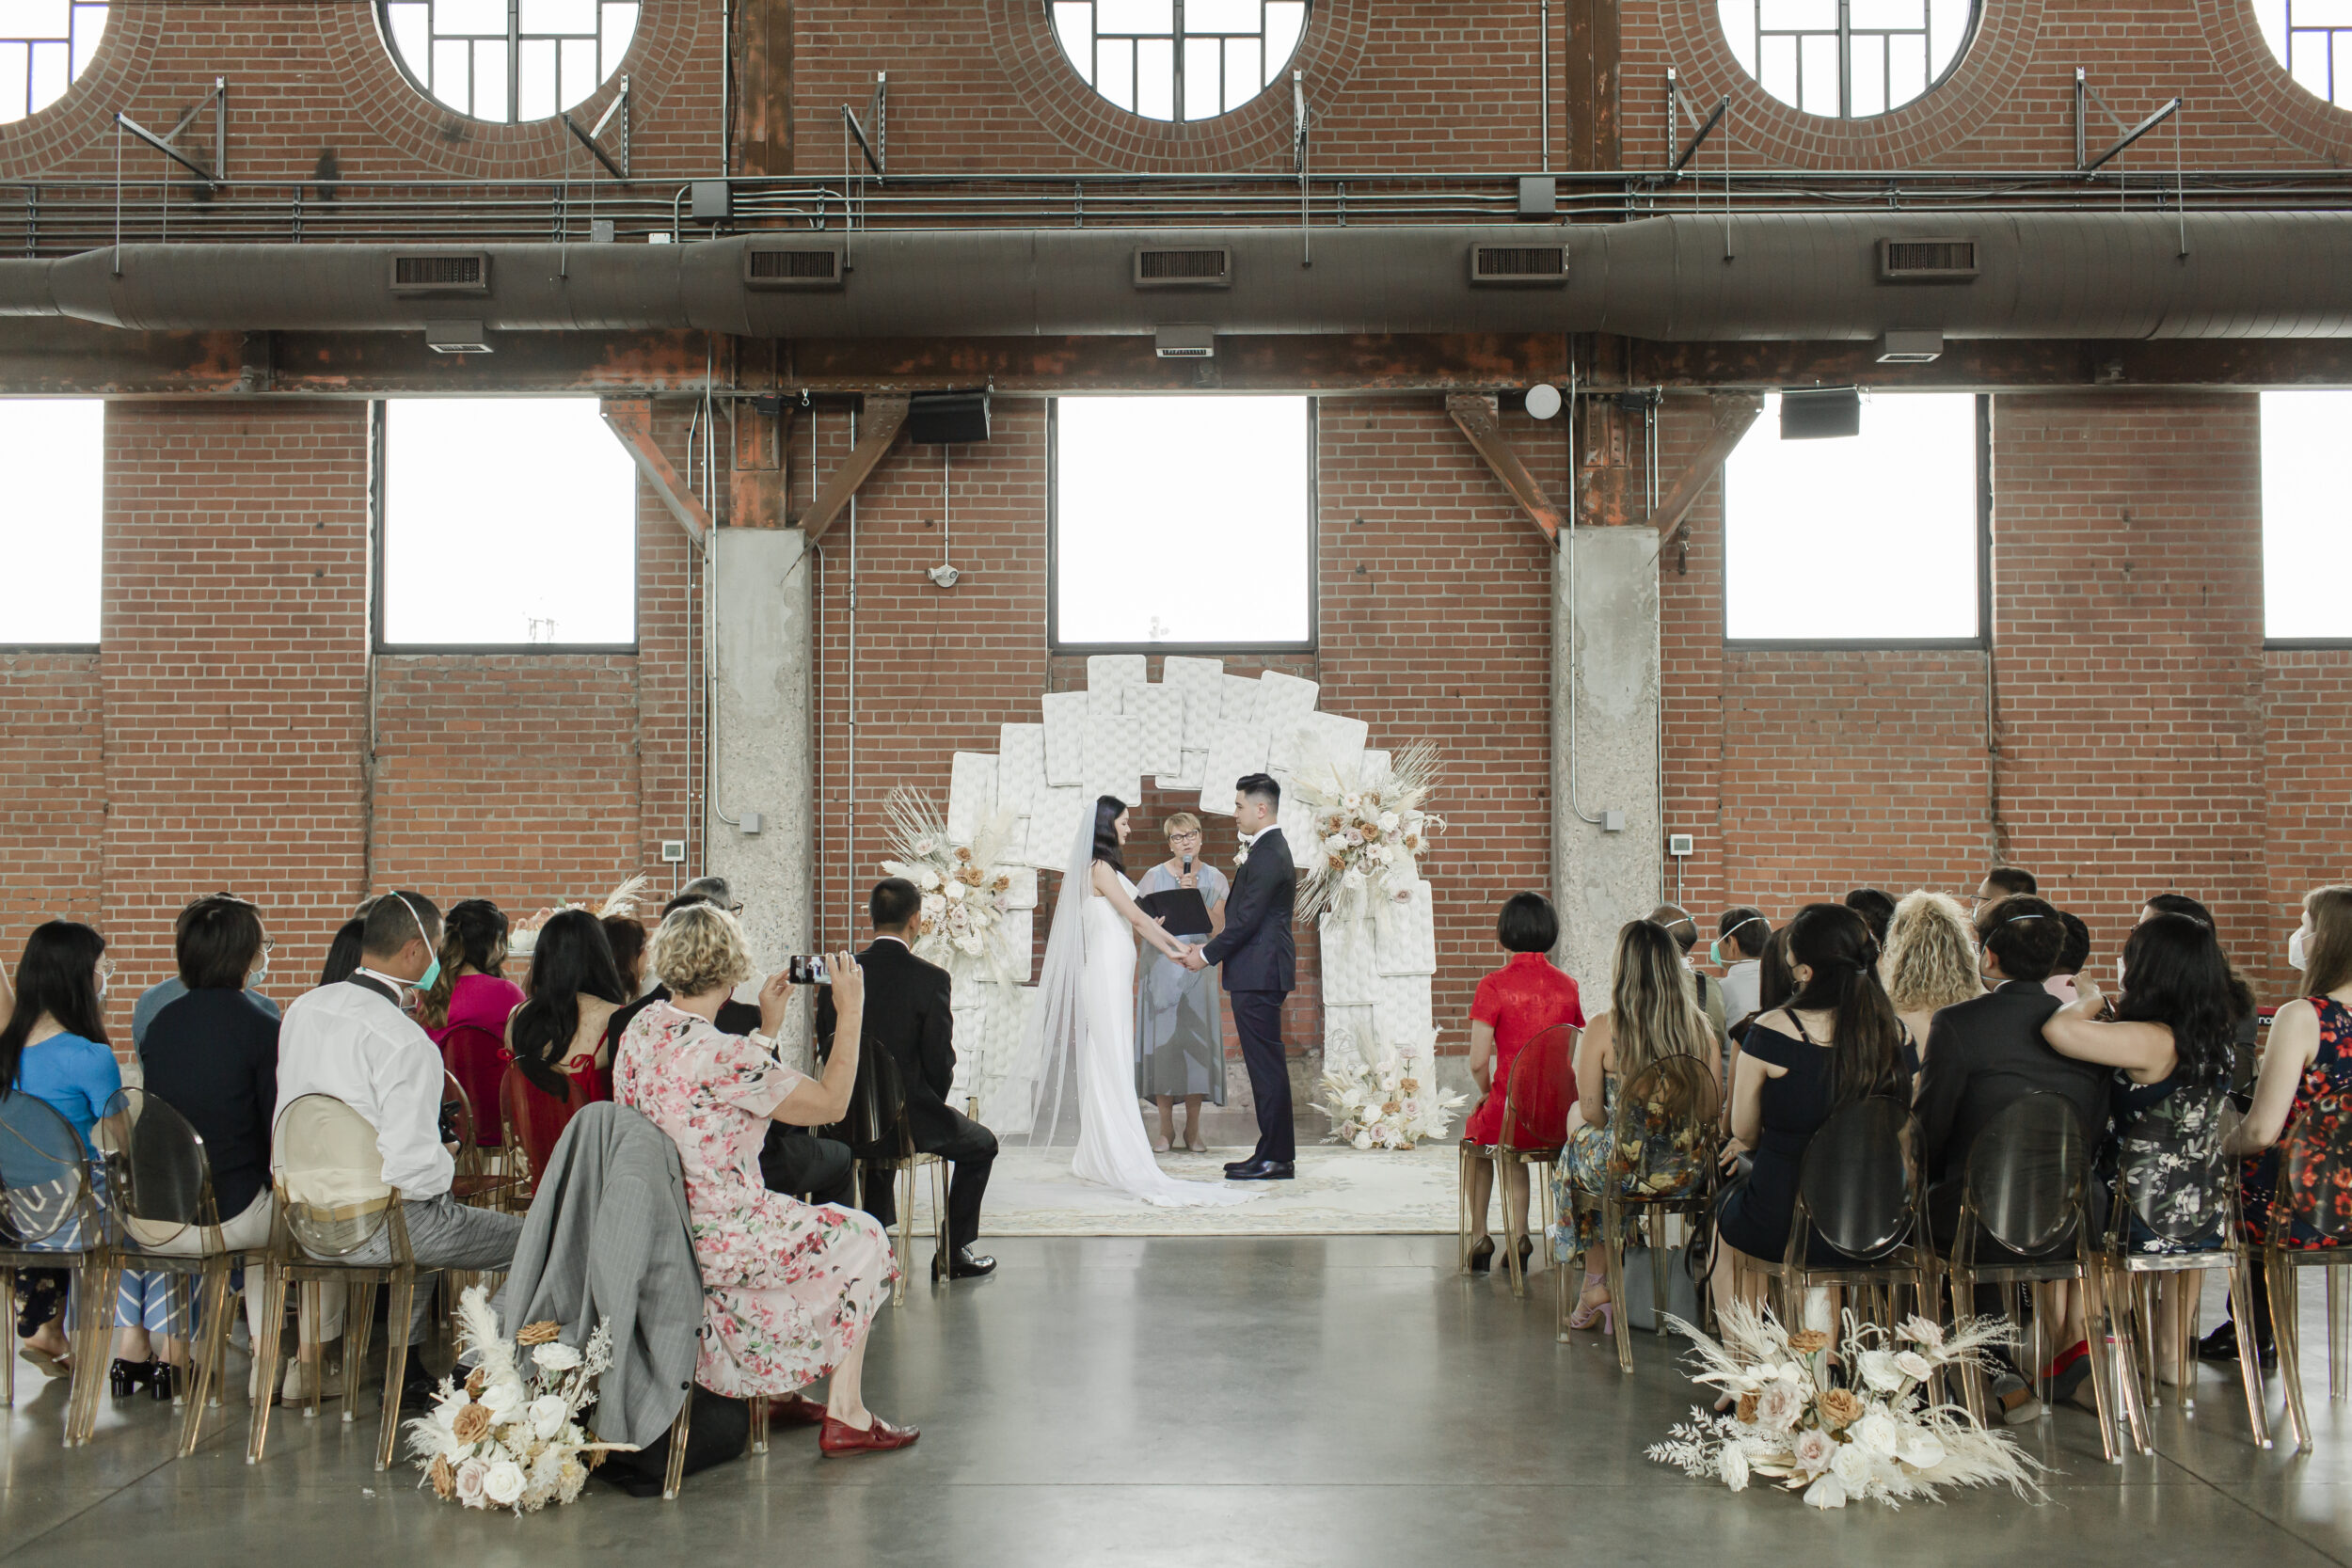 A couple gets married in Toronto inside a restored and historic brick building.